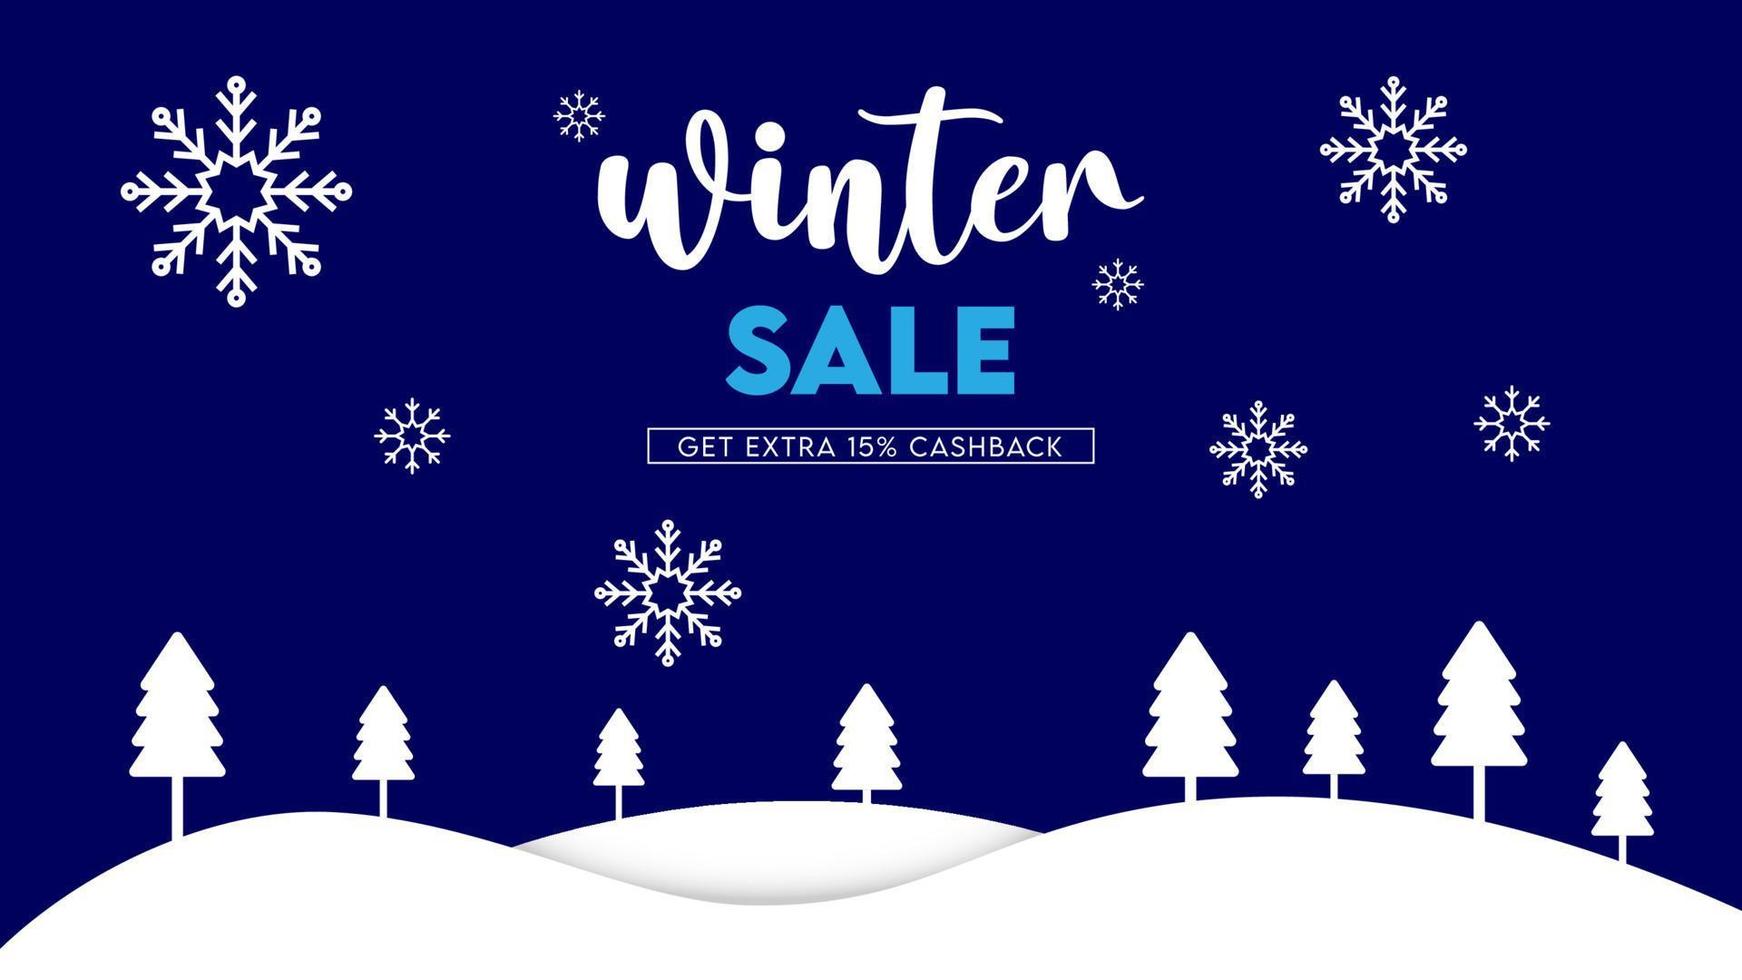 Vector illustration of Winter sale banner template, text promo with white snowflakes element in blue background.